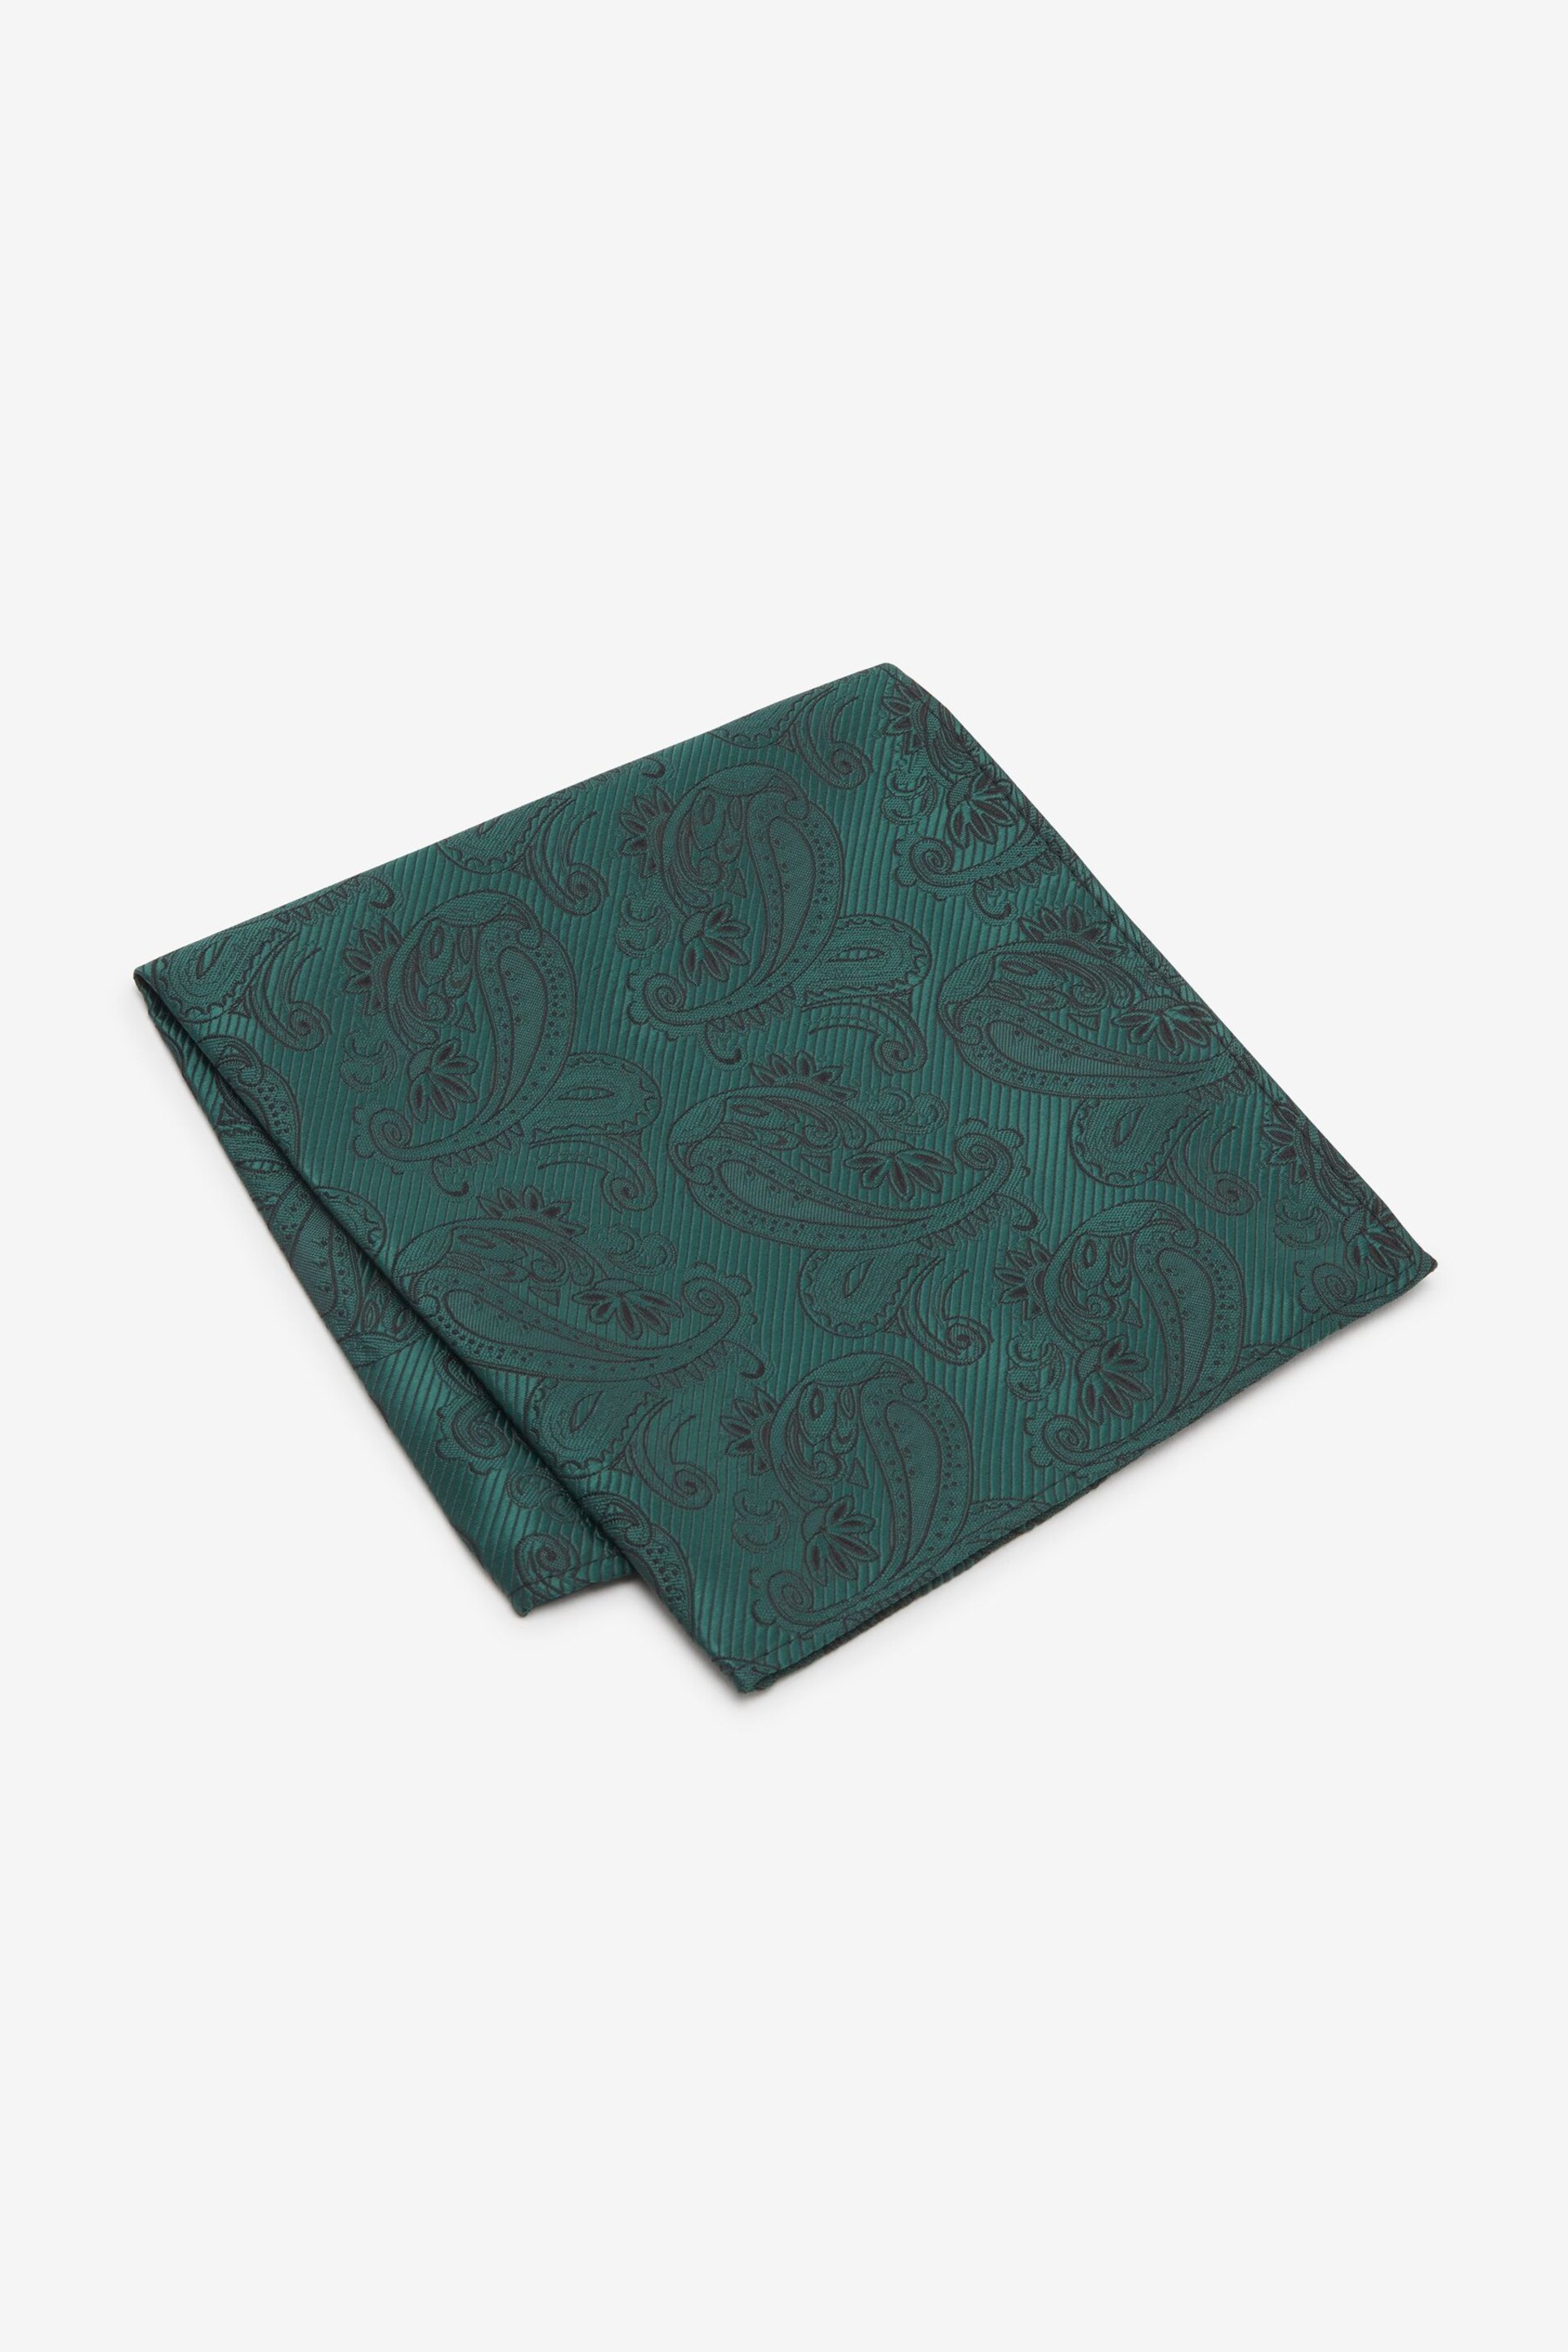 Forest Green Paisley Slim Tie Pocket Square And Lapel Pin Set - Image 3 of 5